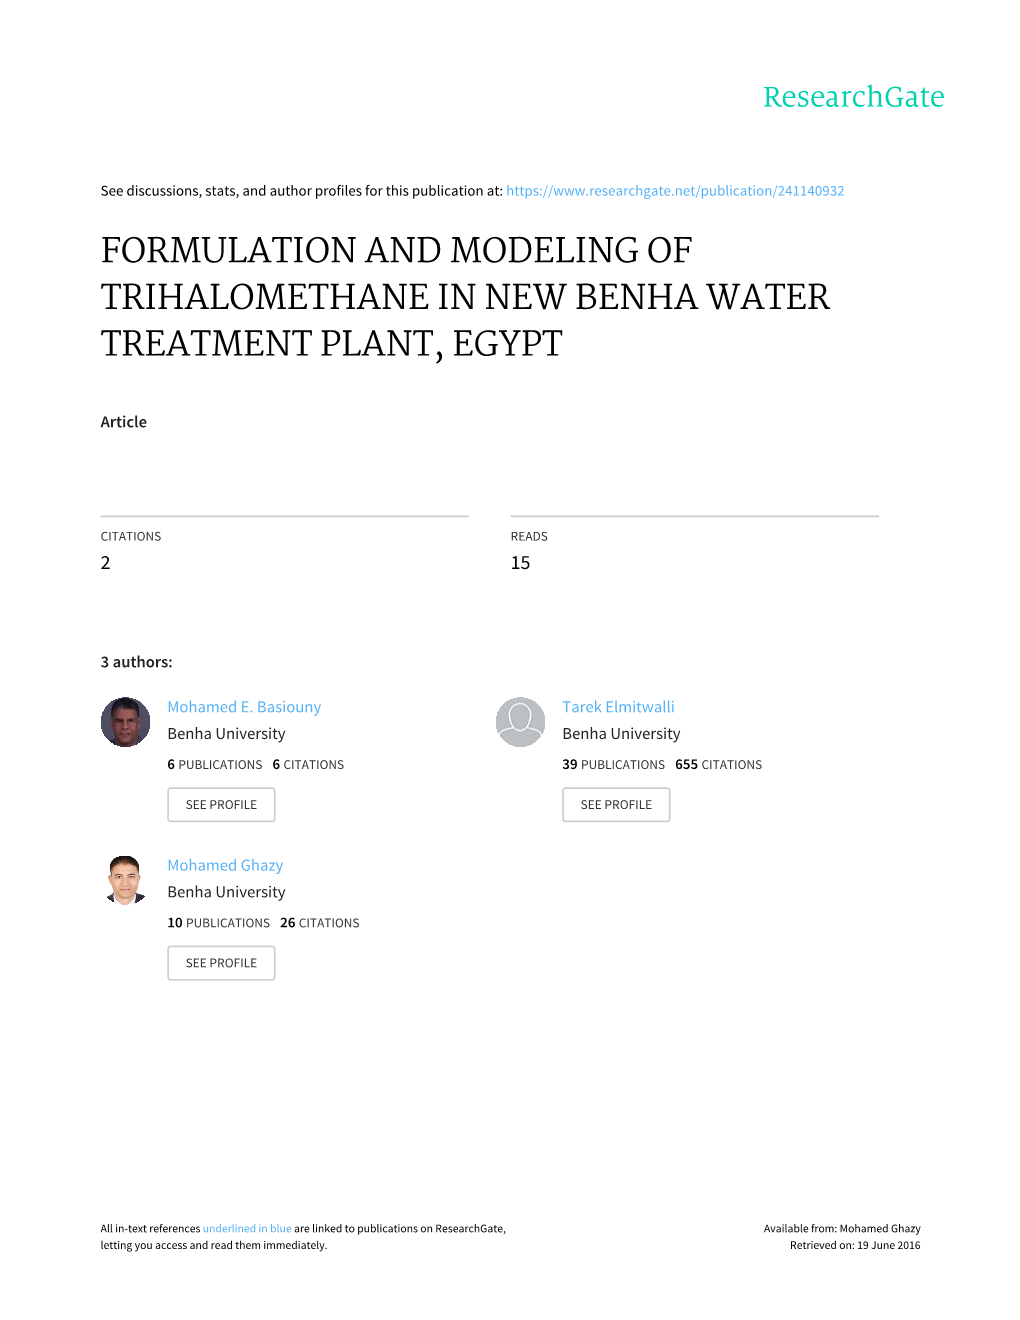 Formulation and Modeling of Trihalomethane in New Benha Water Treatment Plant, Egypt